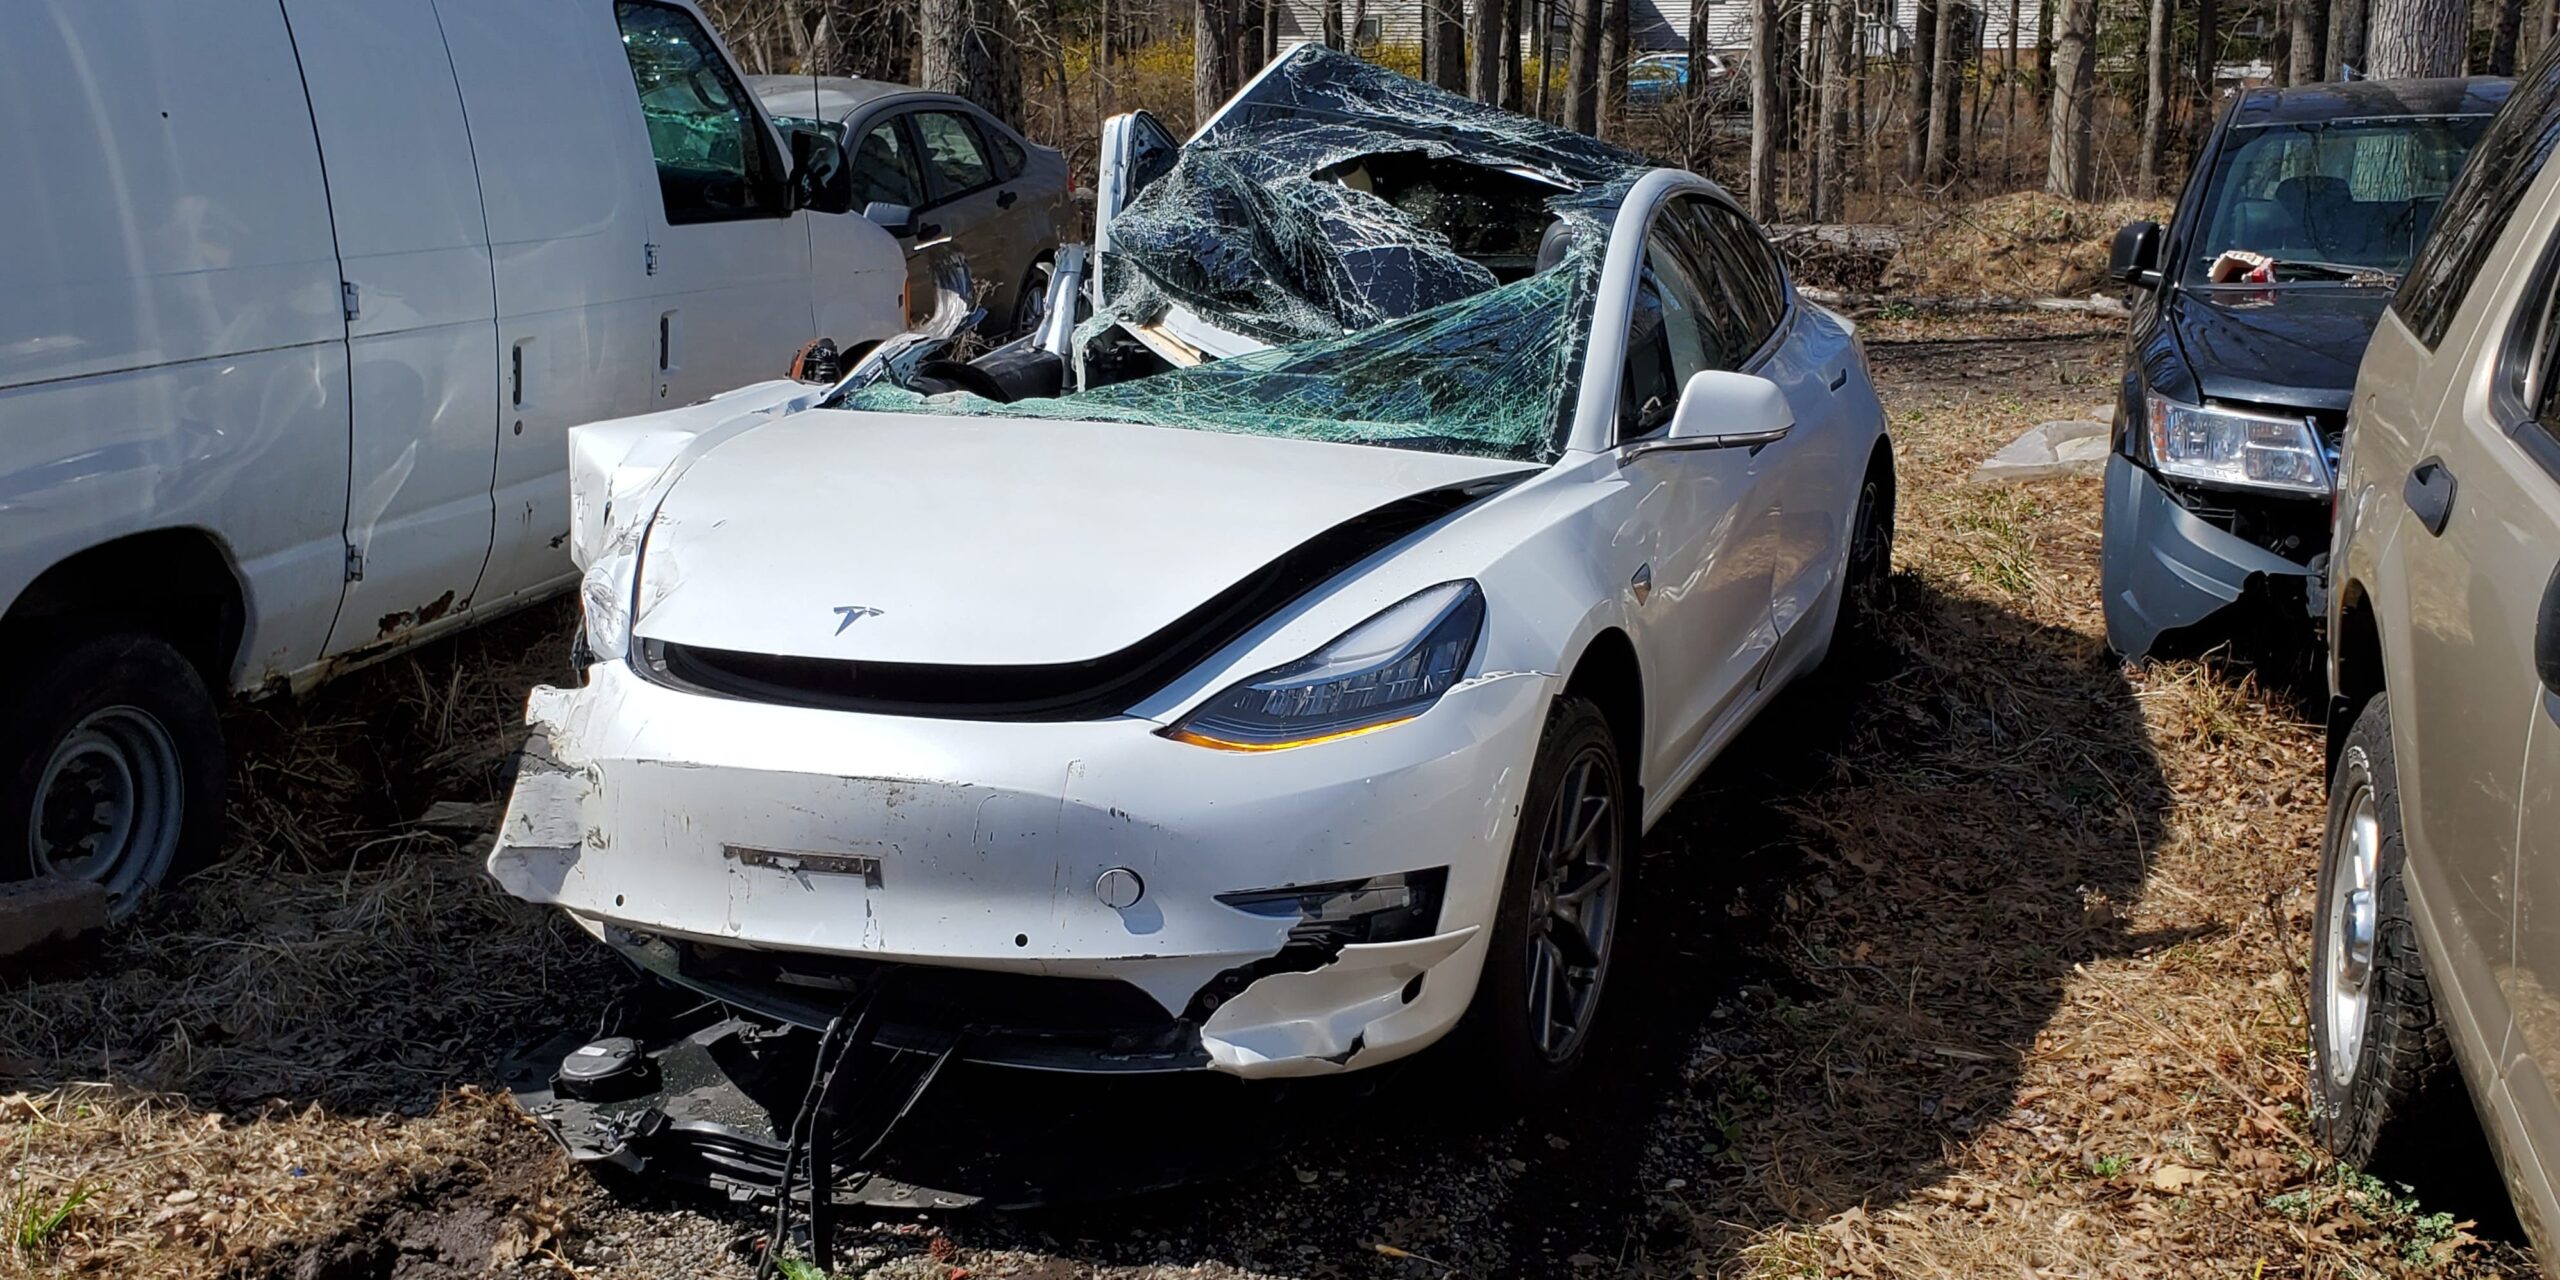 Safety regulators are investigating Autopilot’s role in 30 Tesla crashes that killed 10 people, report says